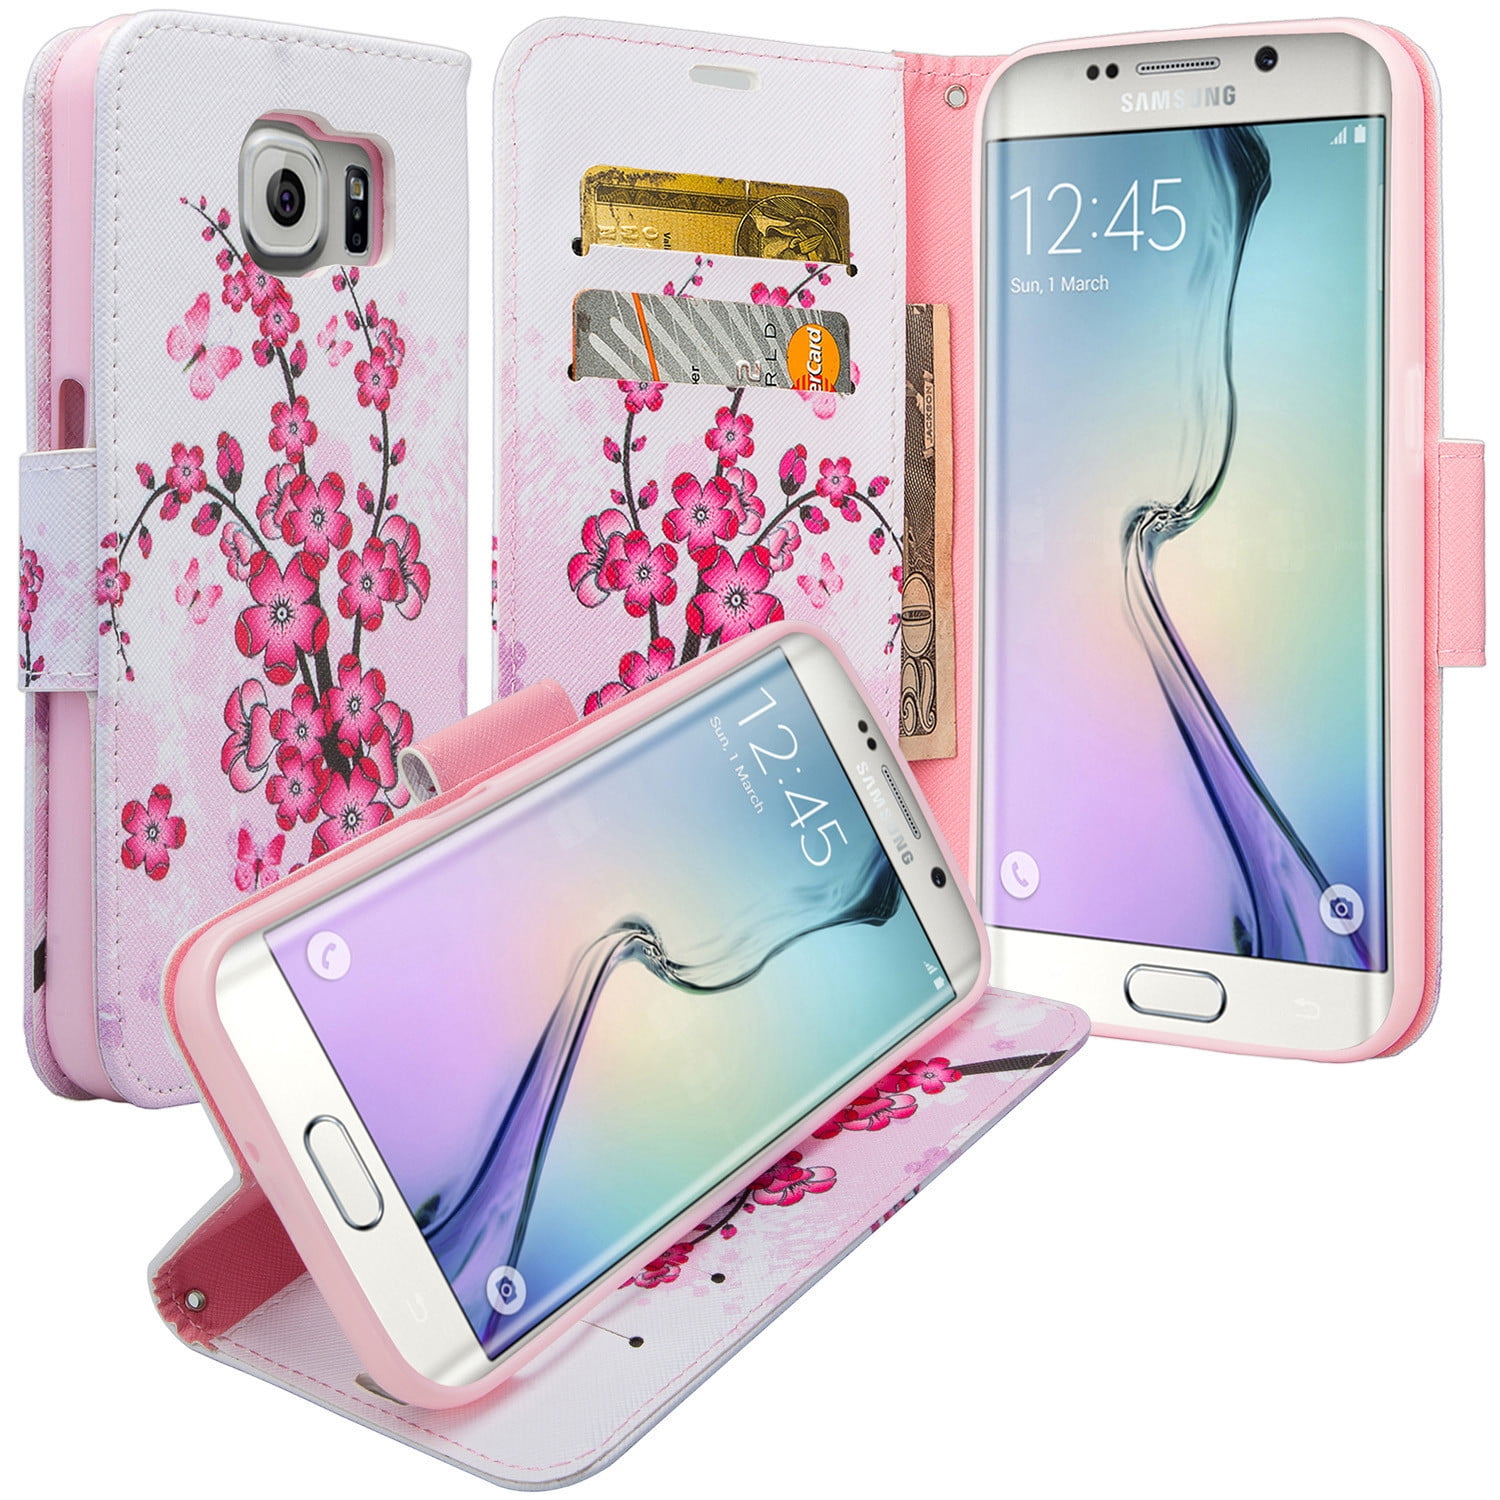 Conclusie verkoper Smash For Samsung Galaxy S6 Edge Plus Wallet Case, Wrist Strap Magnetic Flip  Fold[Kickstand] Pu Leather Wallet Case with ID & Card Slots for Galaxy S6  Edge Plus - Cherry Blossom - Walmart.com